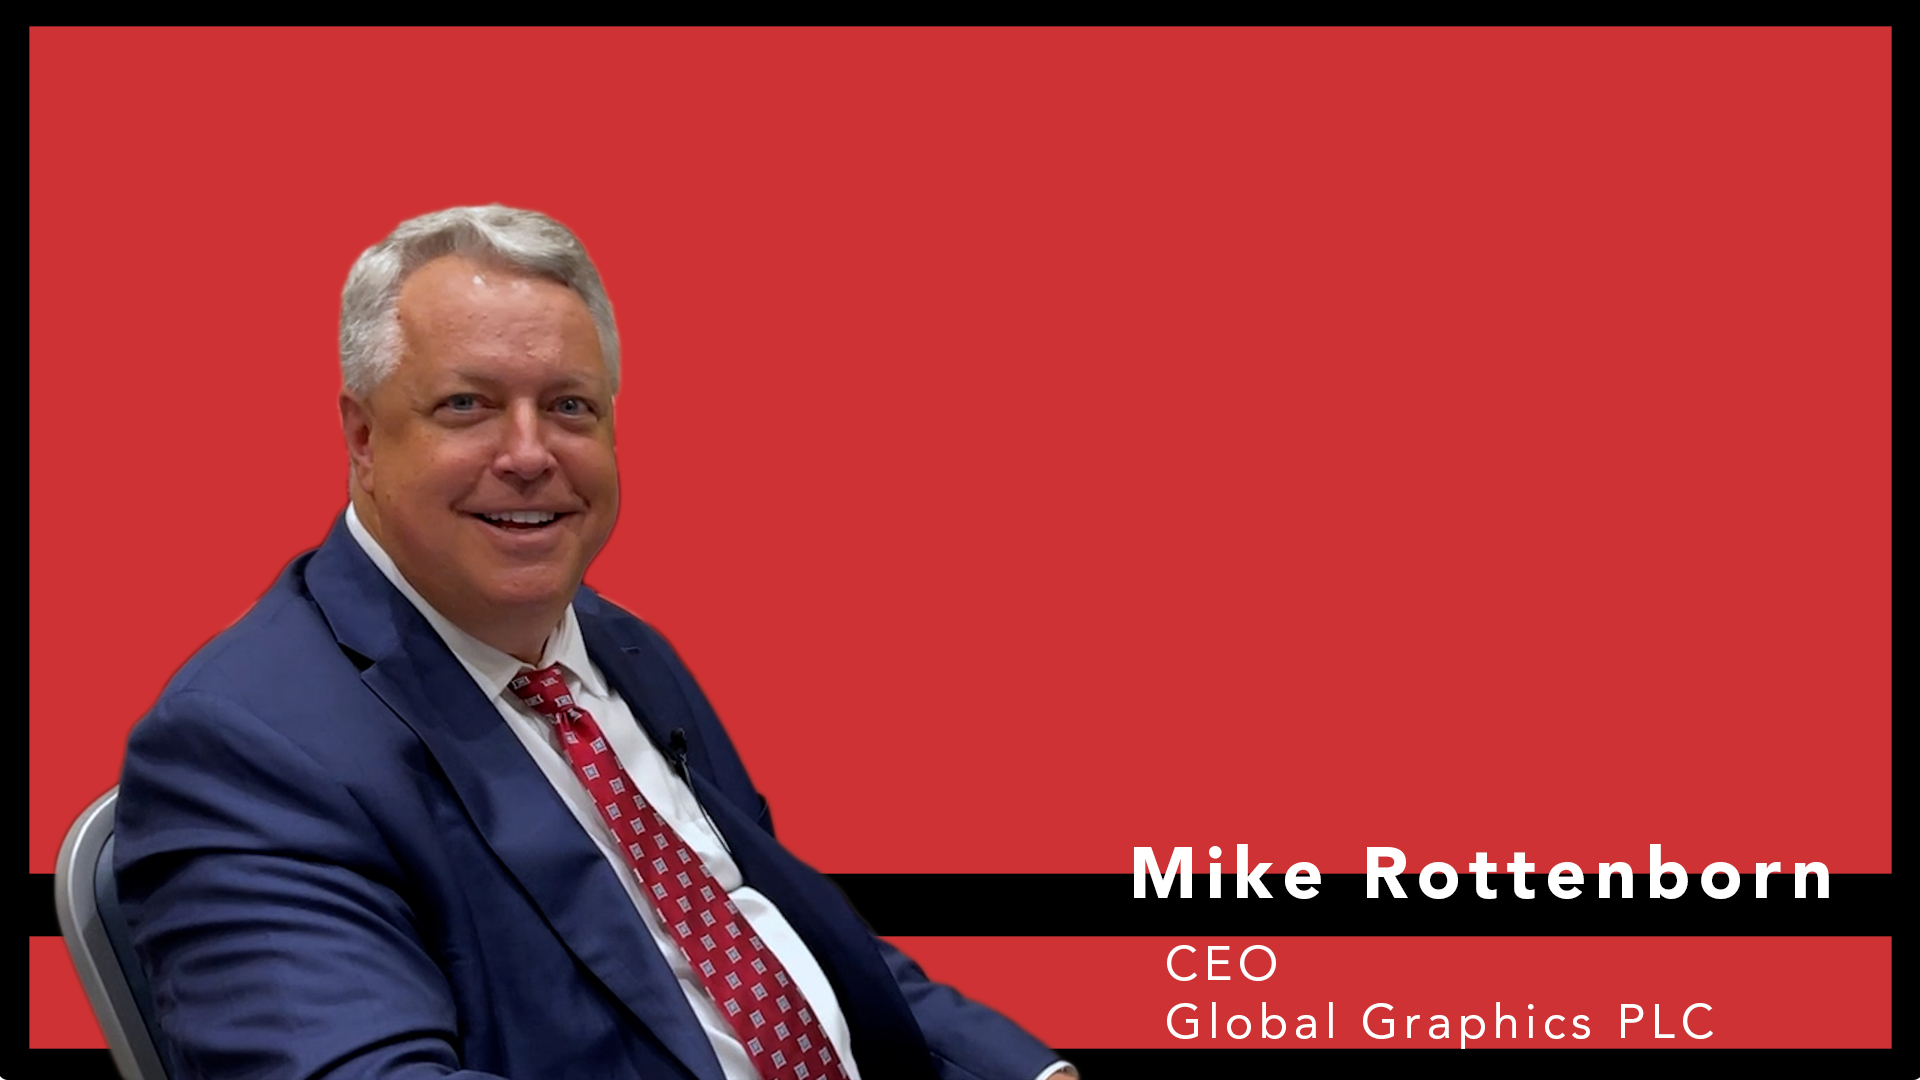 Global Graphics' Mike Rottenborn on the Company's Acquisitions and Growth